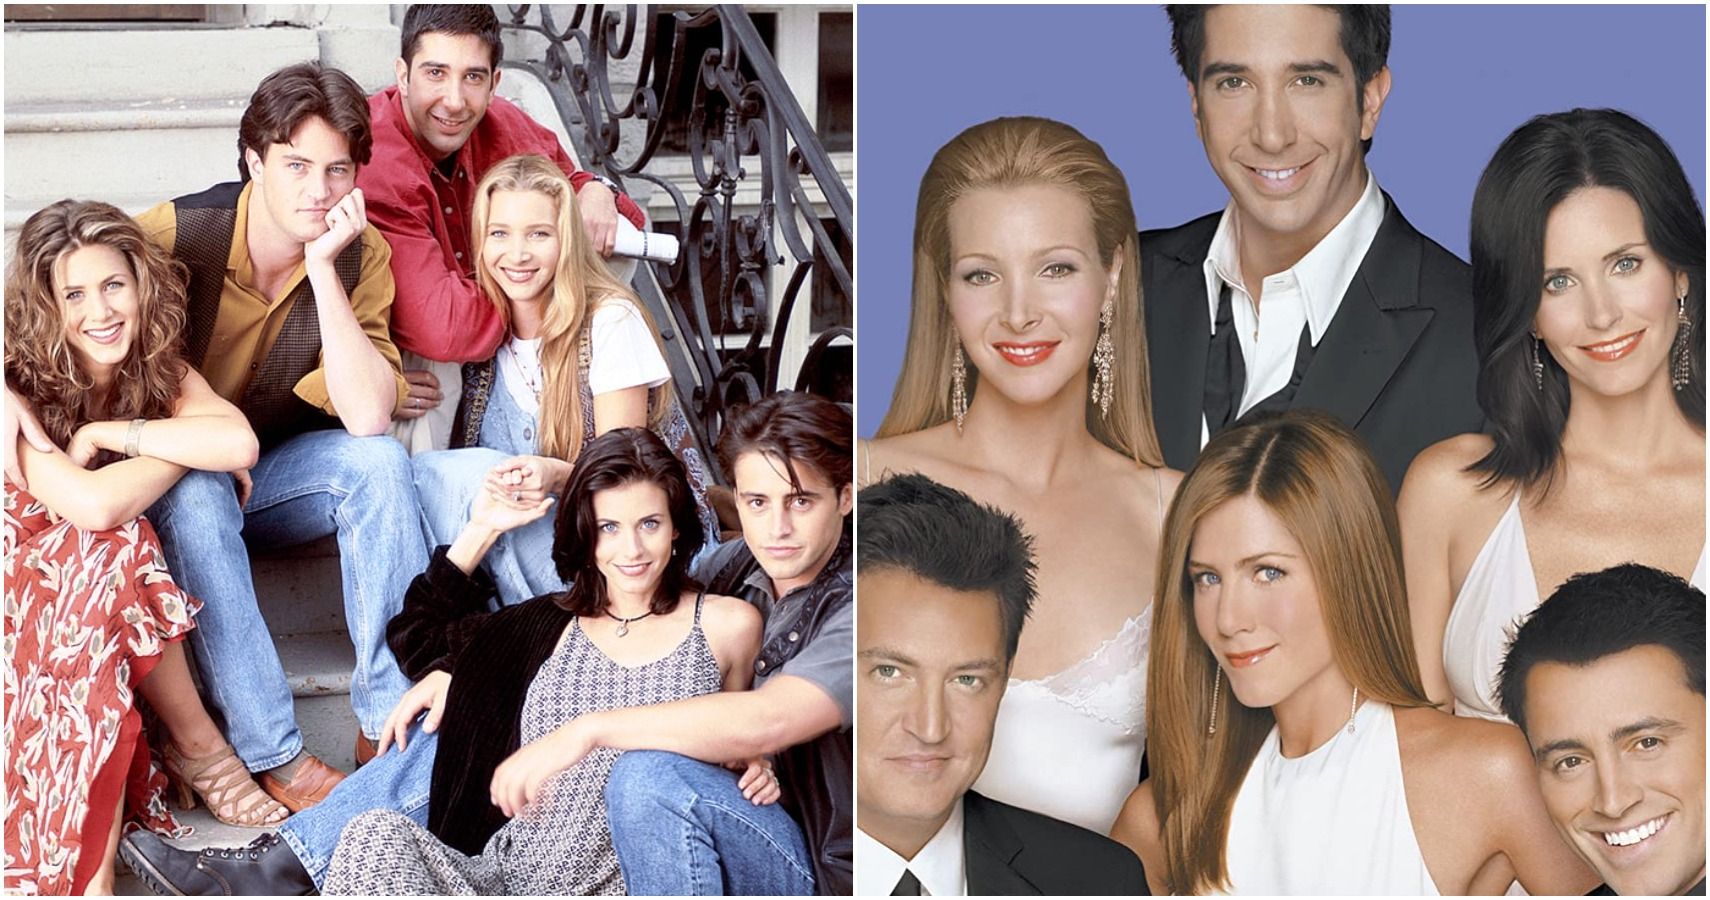 Friends: How It Changed From Season 1 To 10 (For Better Or Worse)